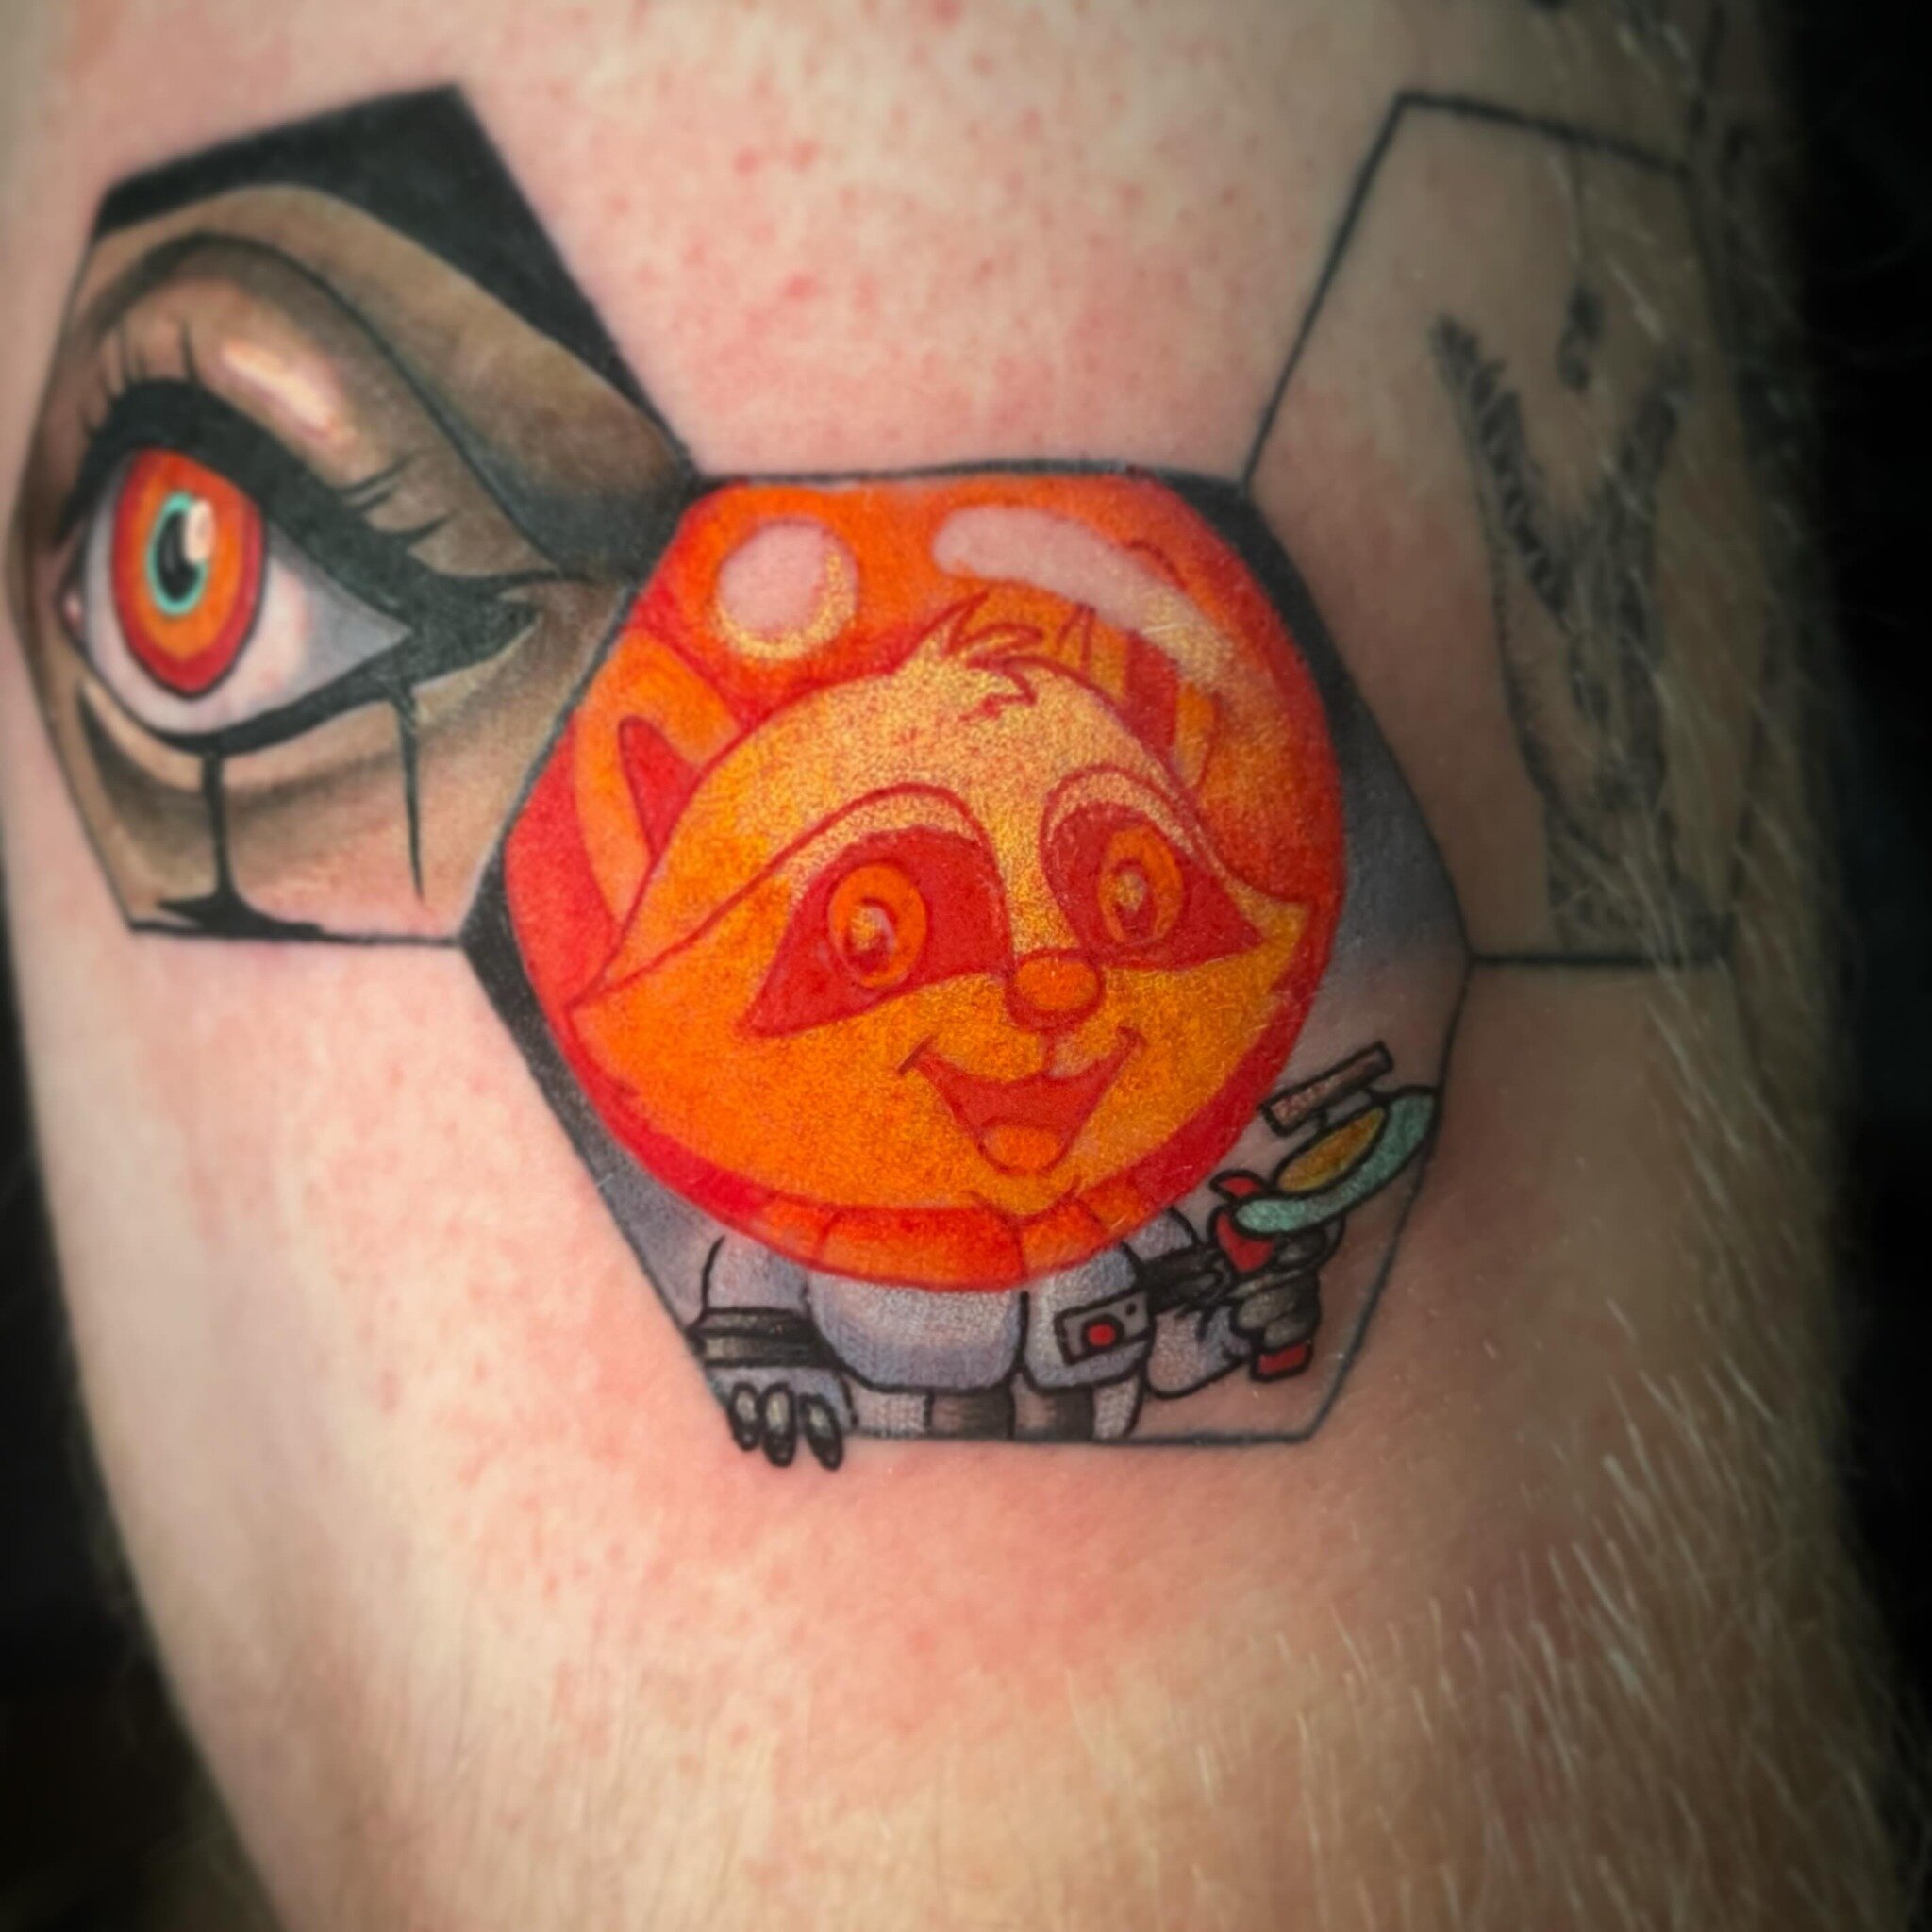 I&rsquo;m so behind on posting so here is a fun space trash panda from a few months ago!! Thanks @tshreve33 for switching over to the dark side (color tattoos) 
.
.
#trashpanda #racoon #rocket #astronaut #racoontattoo #spacetattoo #tattoo #ink #inked